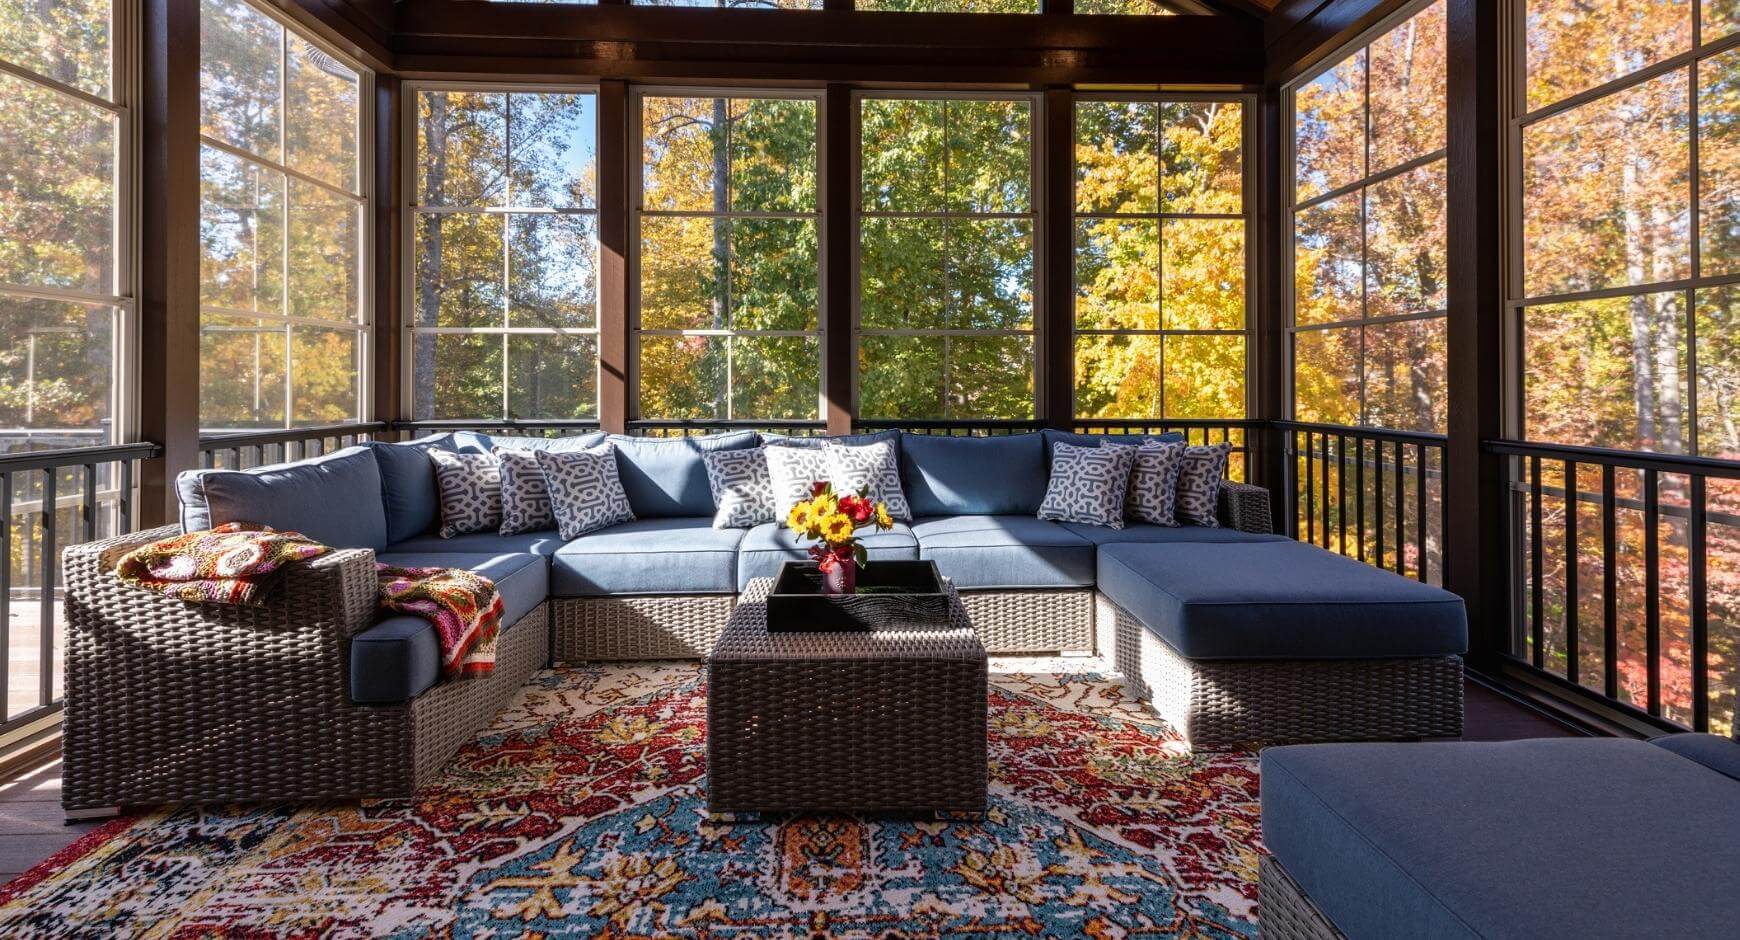 Wrap around couch in an open sunroom